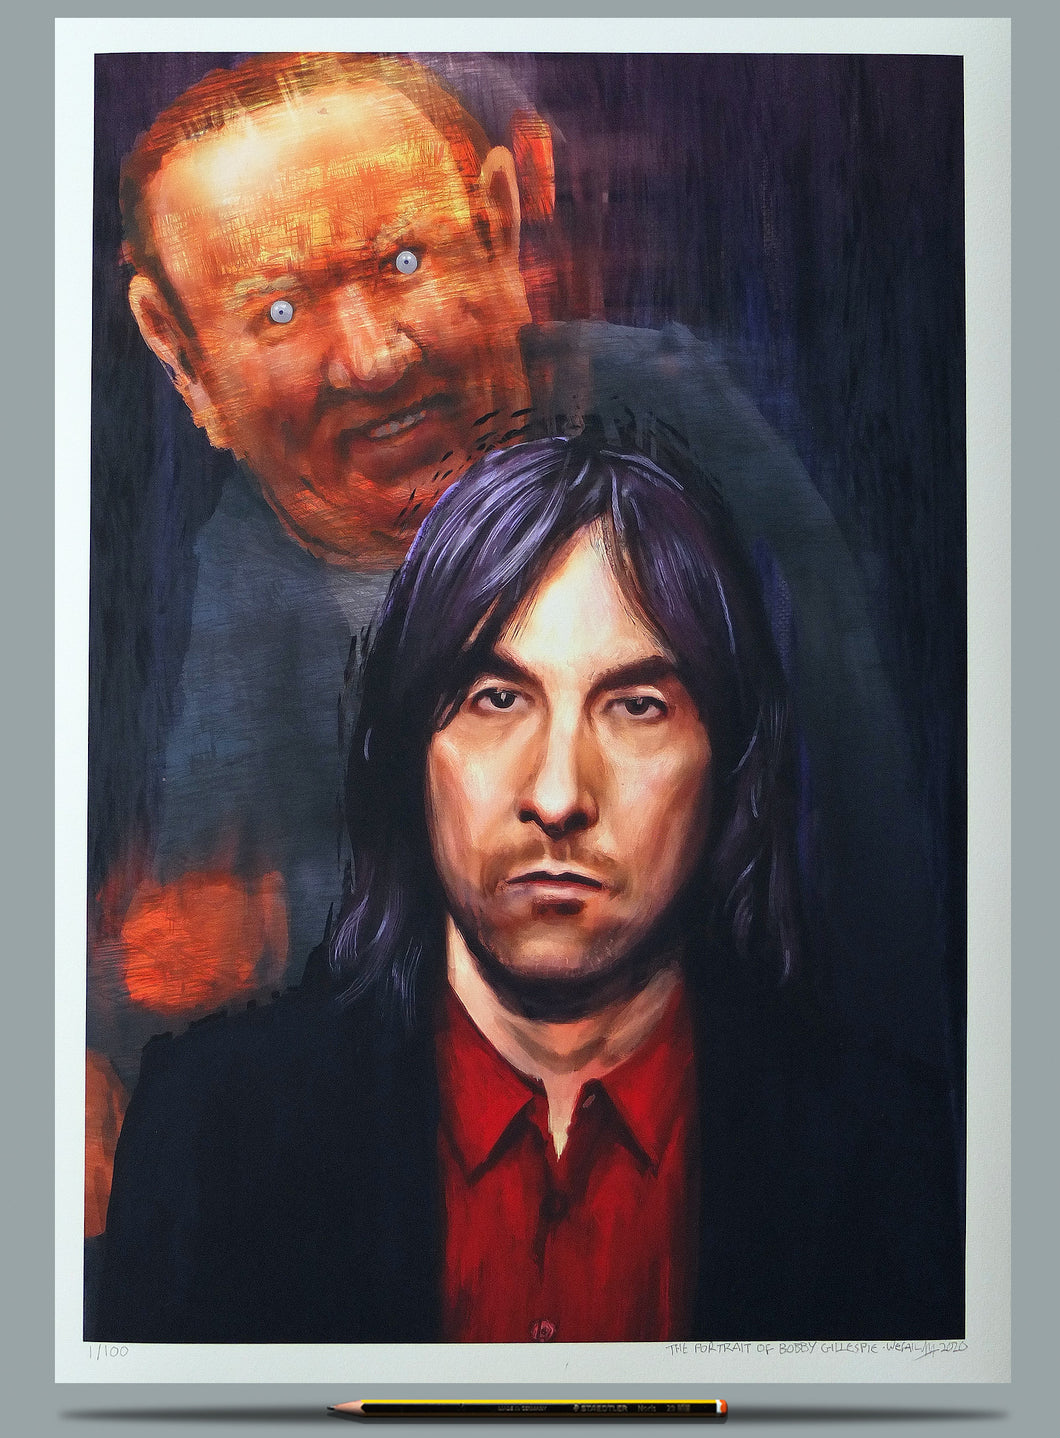 The Portrait of Bobby Gillespie  - Ltd Edition A2